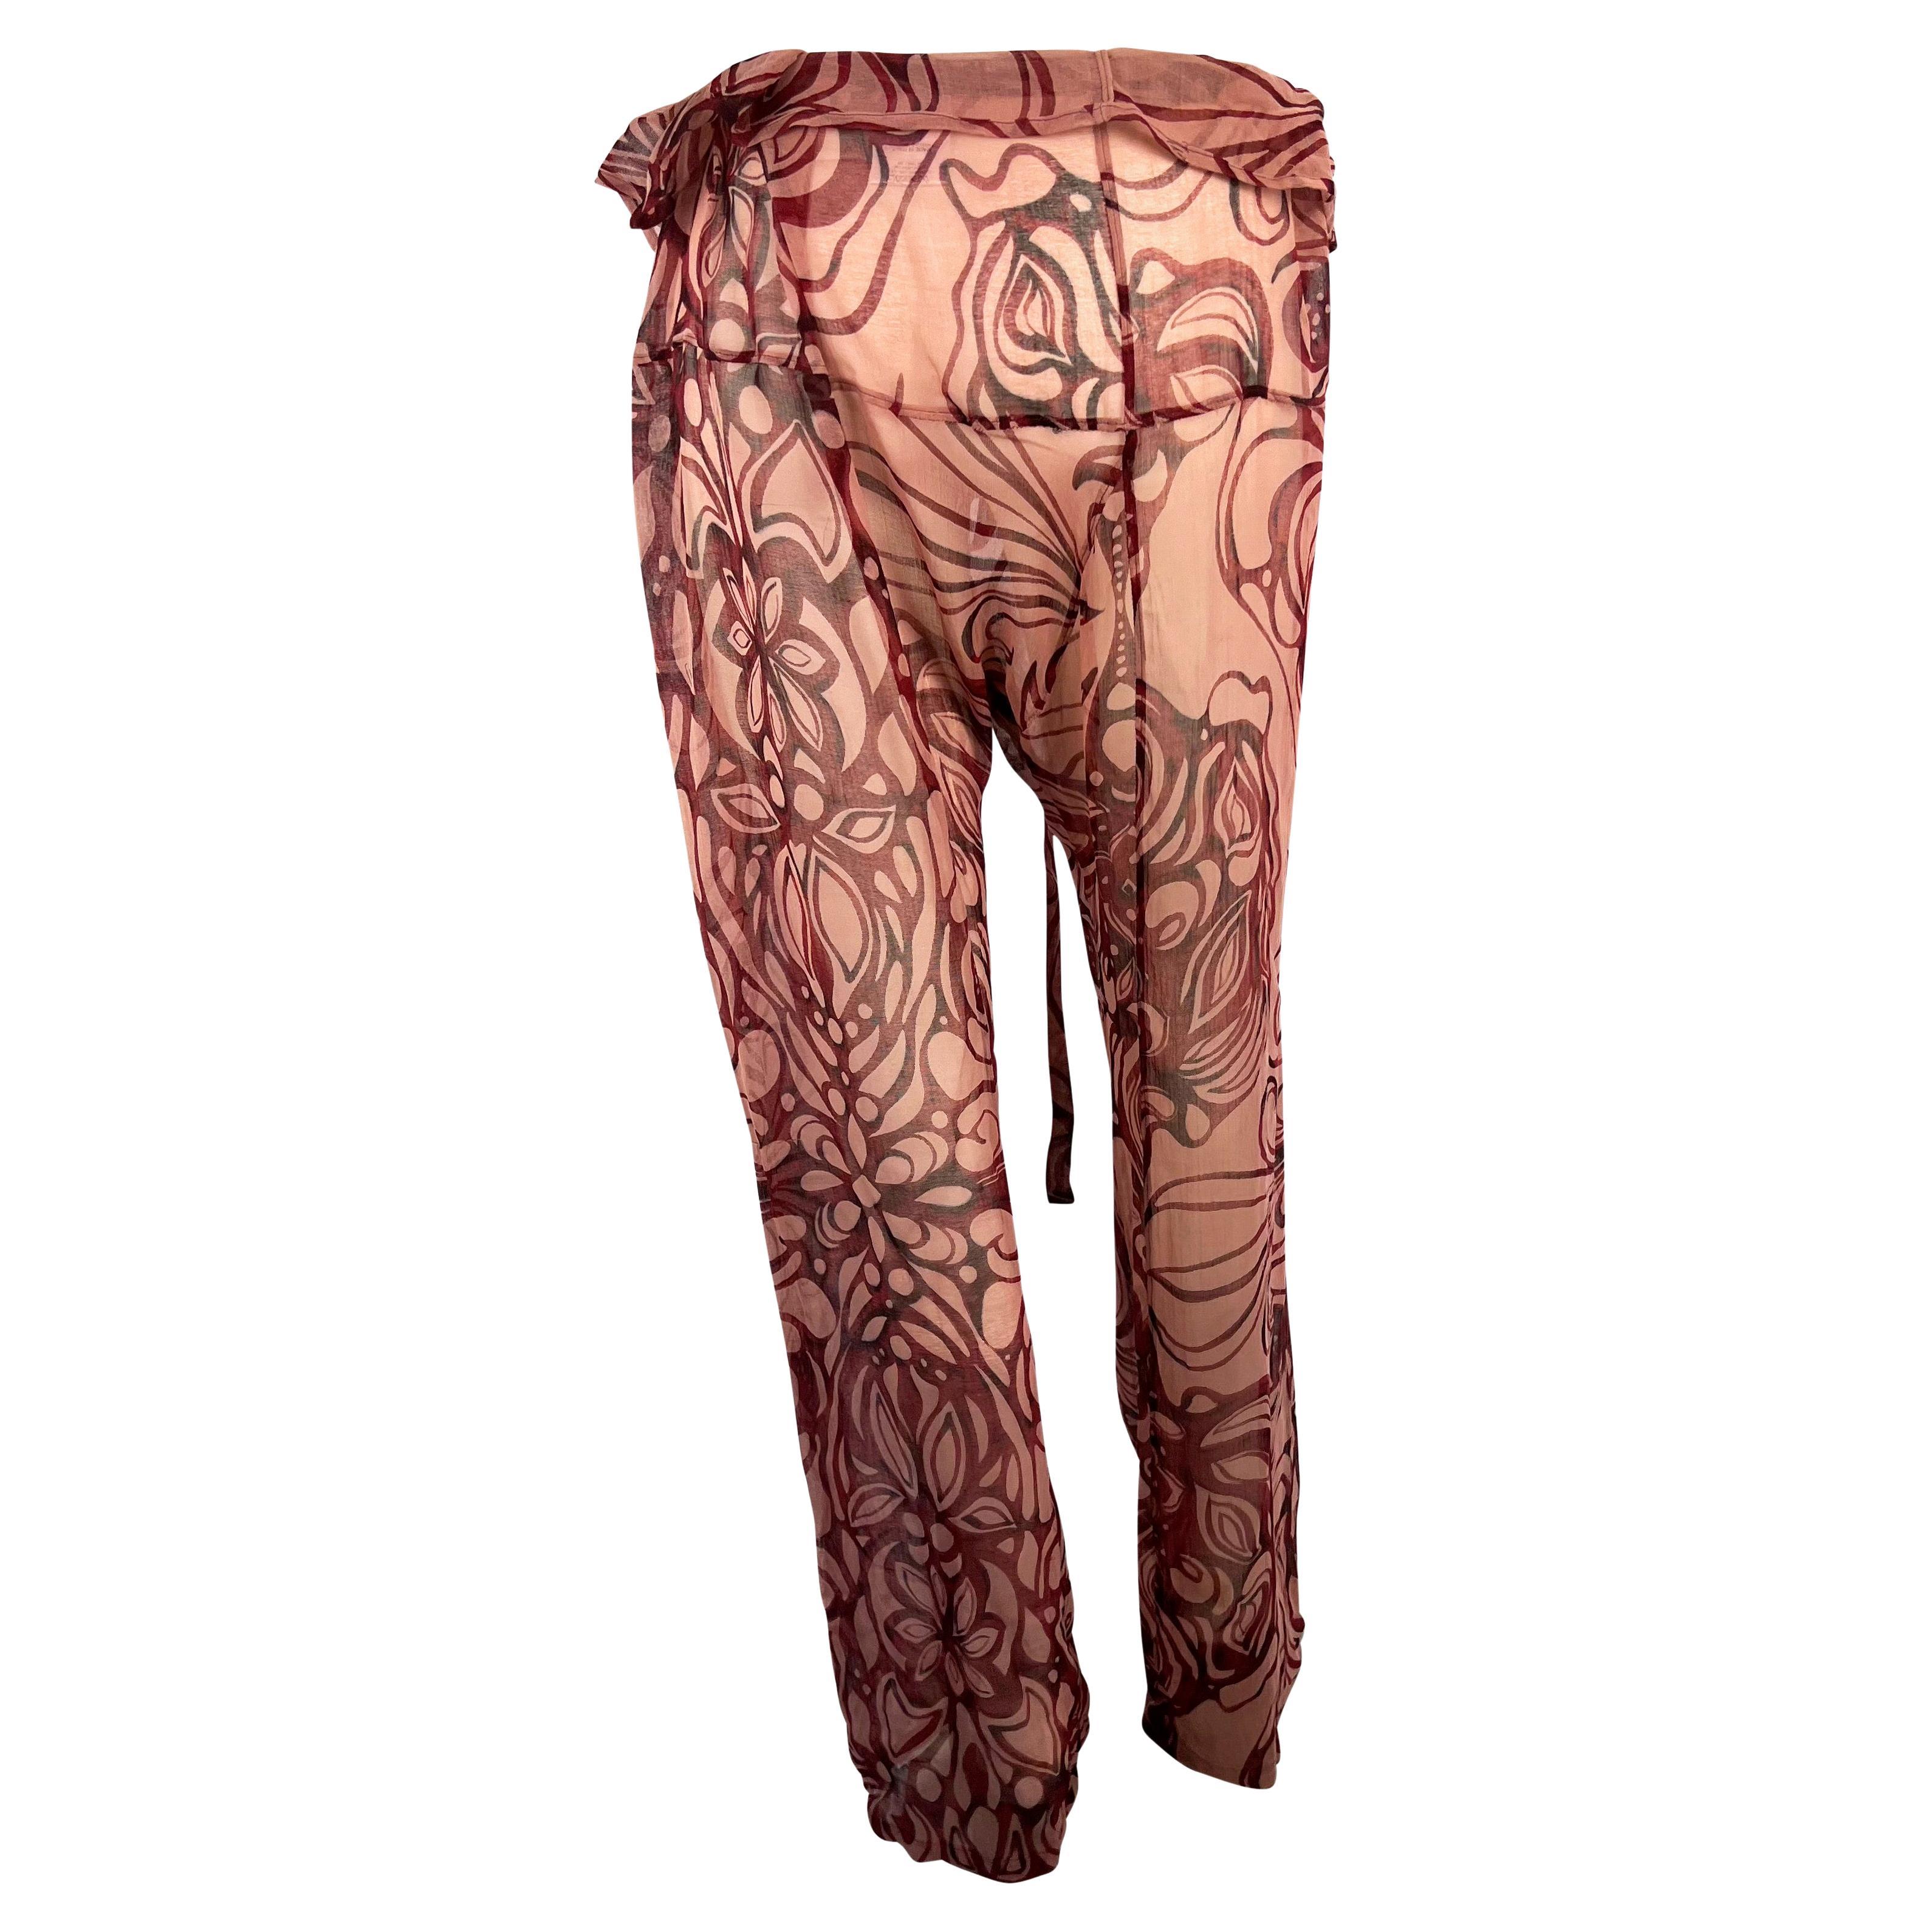 S/S 2002 Gucci von Tom Ford schiere Floral Tattoo Strand Coverup Pant Set NWT im Angebot 5